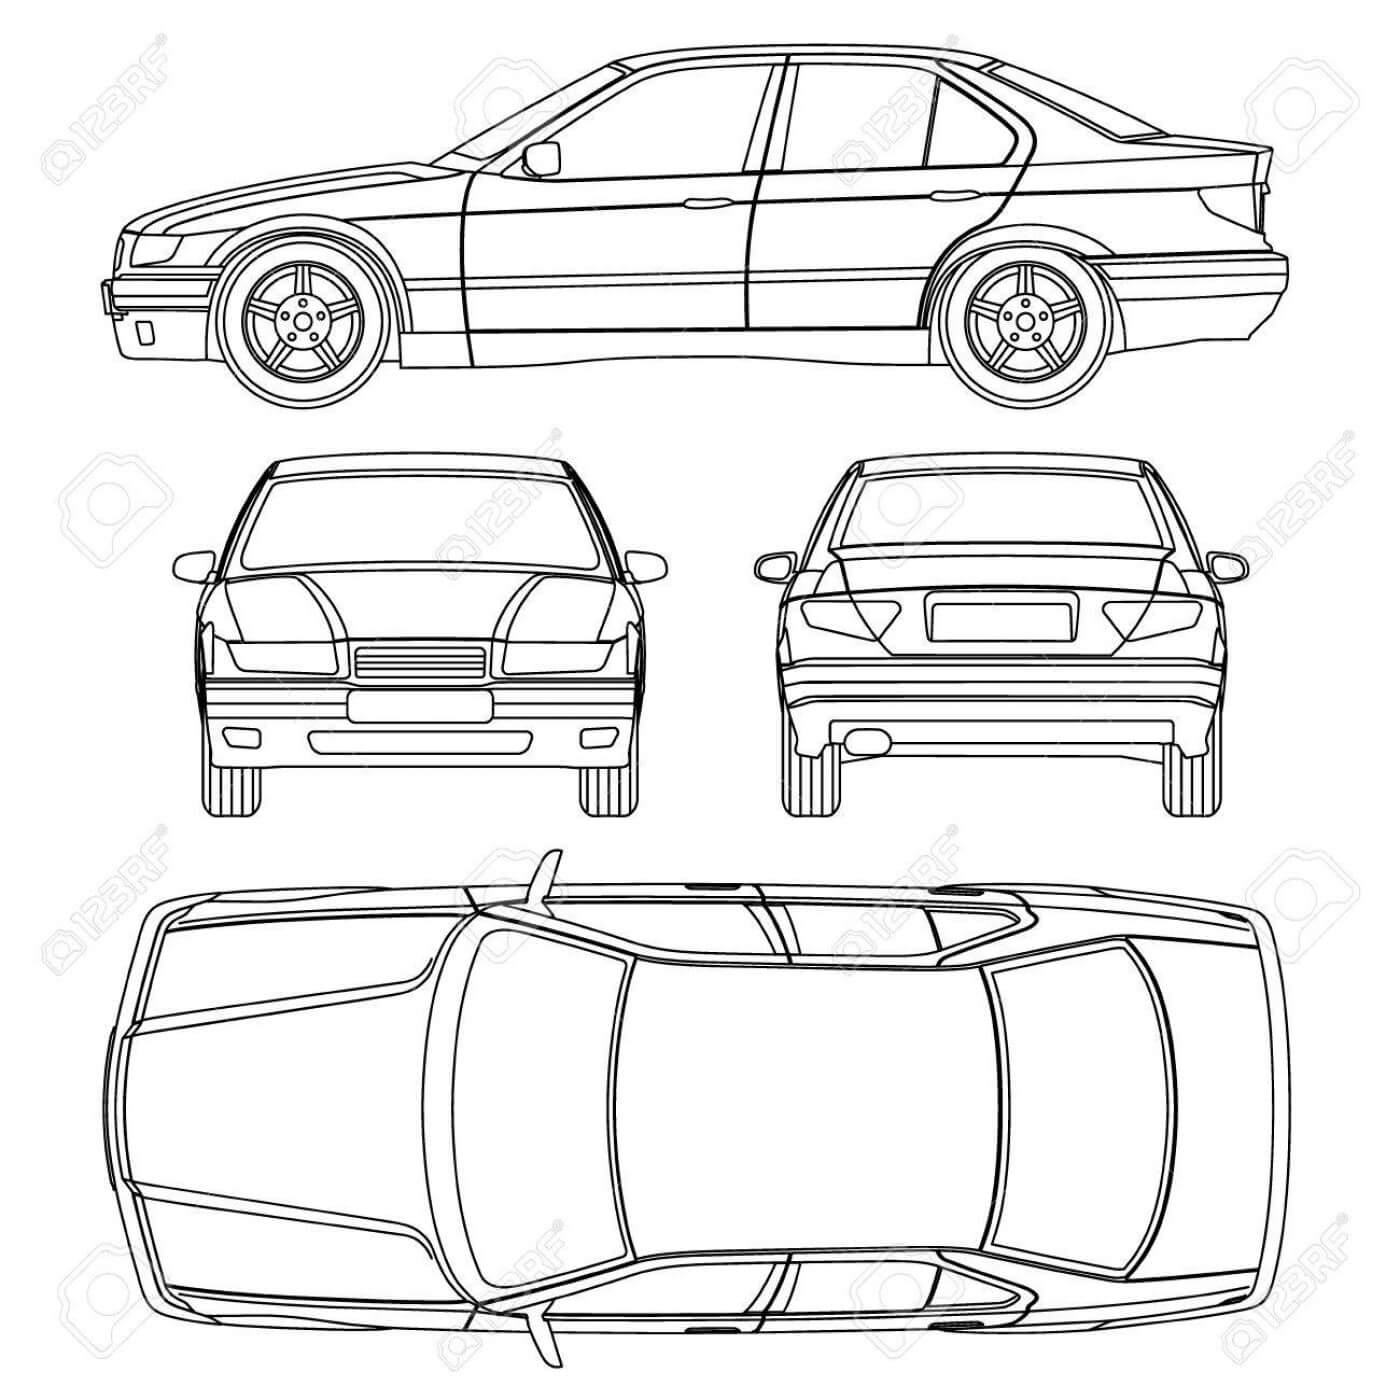 009 Template Ideas Car Line Draw Insurance Damage Condition For Car Damage Report Template